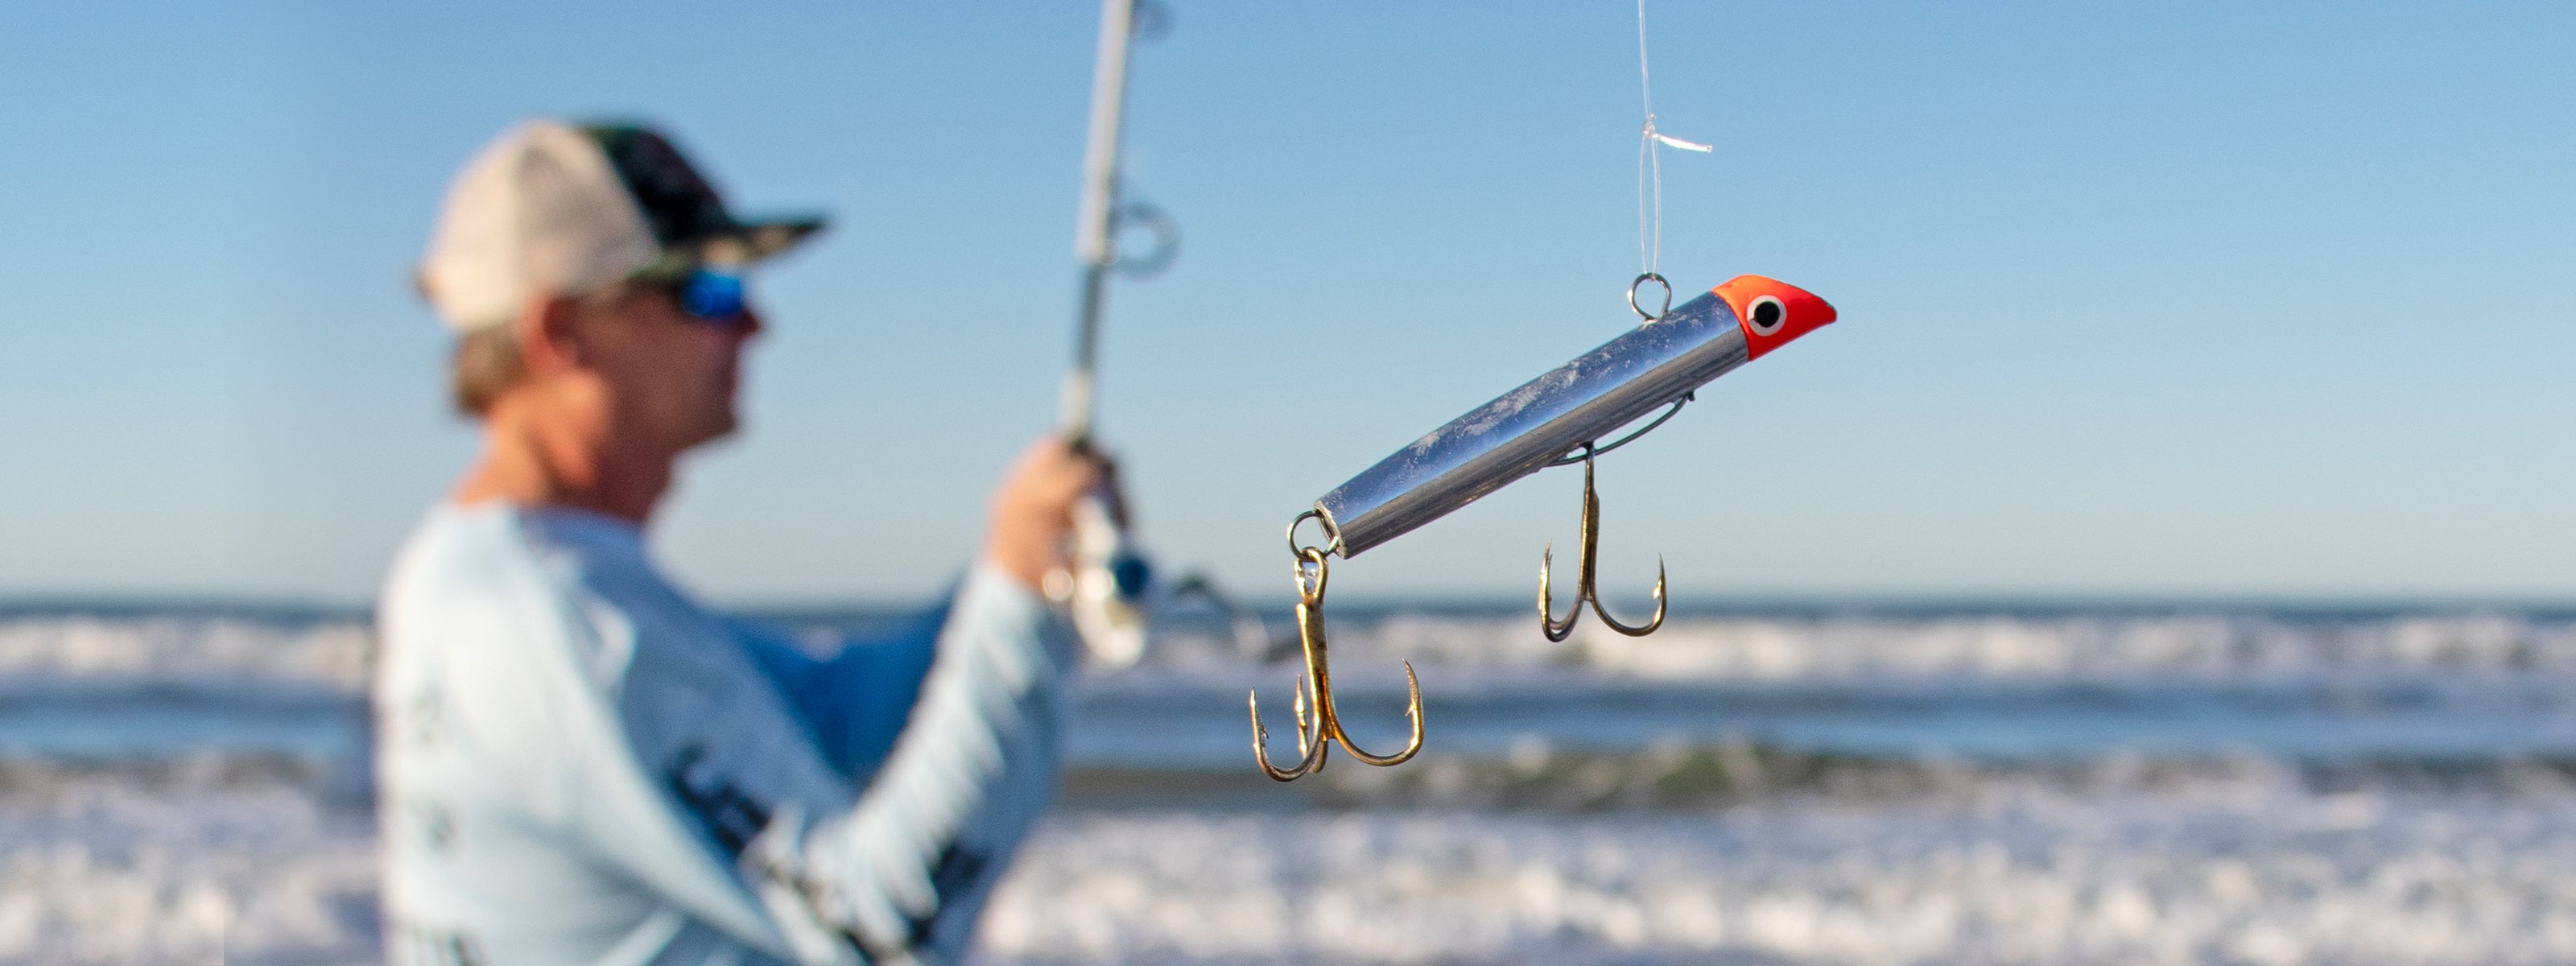 About Got-cha Fishing Lures